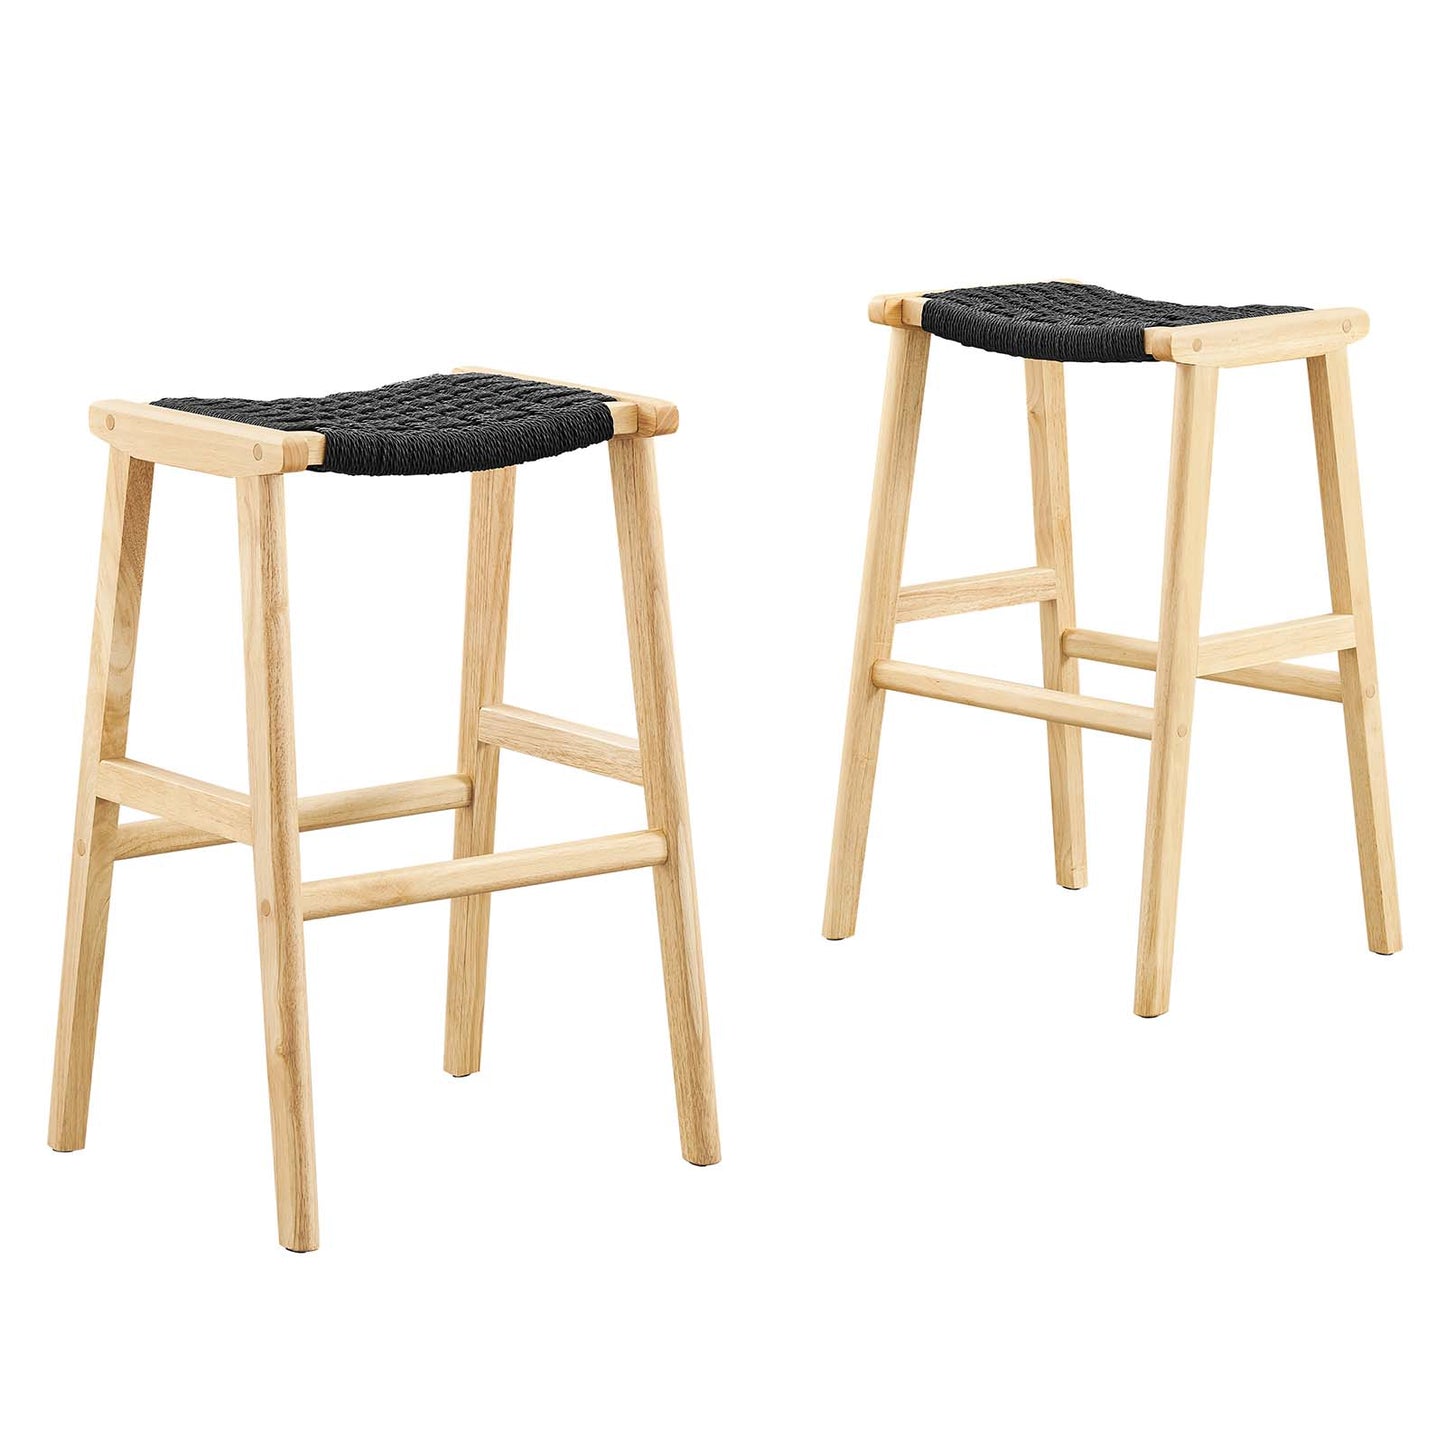 Saoirse Woven Rope Wood Bar Stool - Set of 2 By Modway - EEI-6550 | Bar Stools | Modway - 2